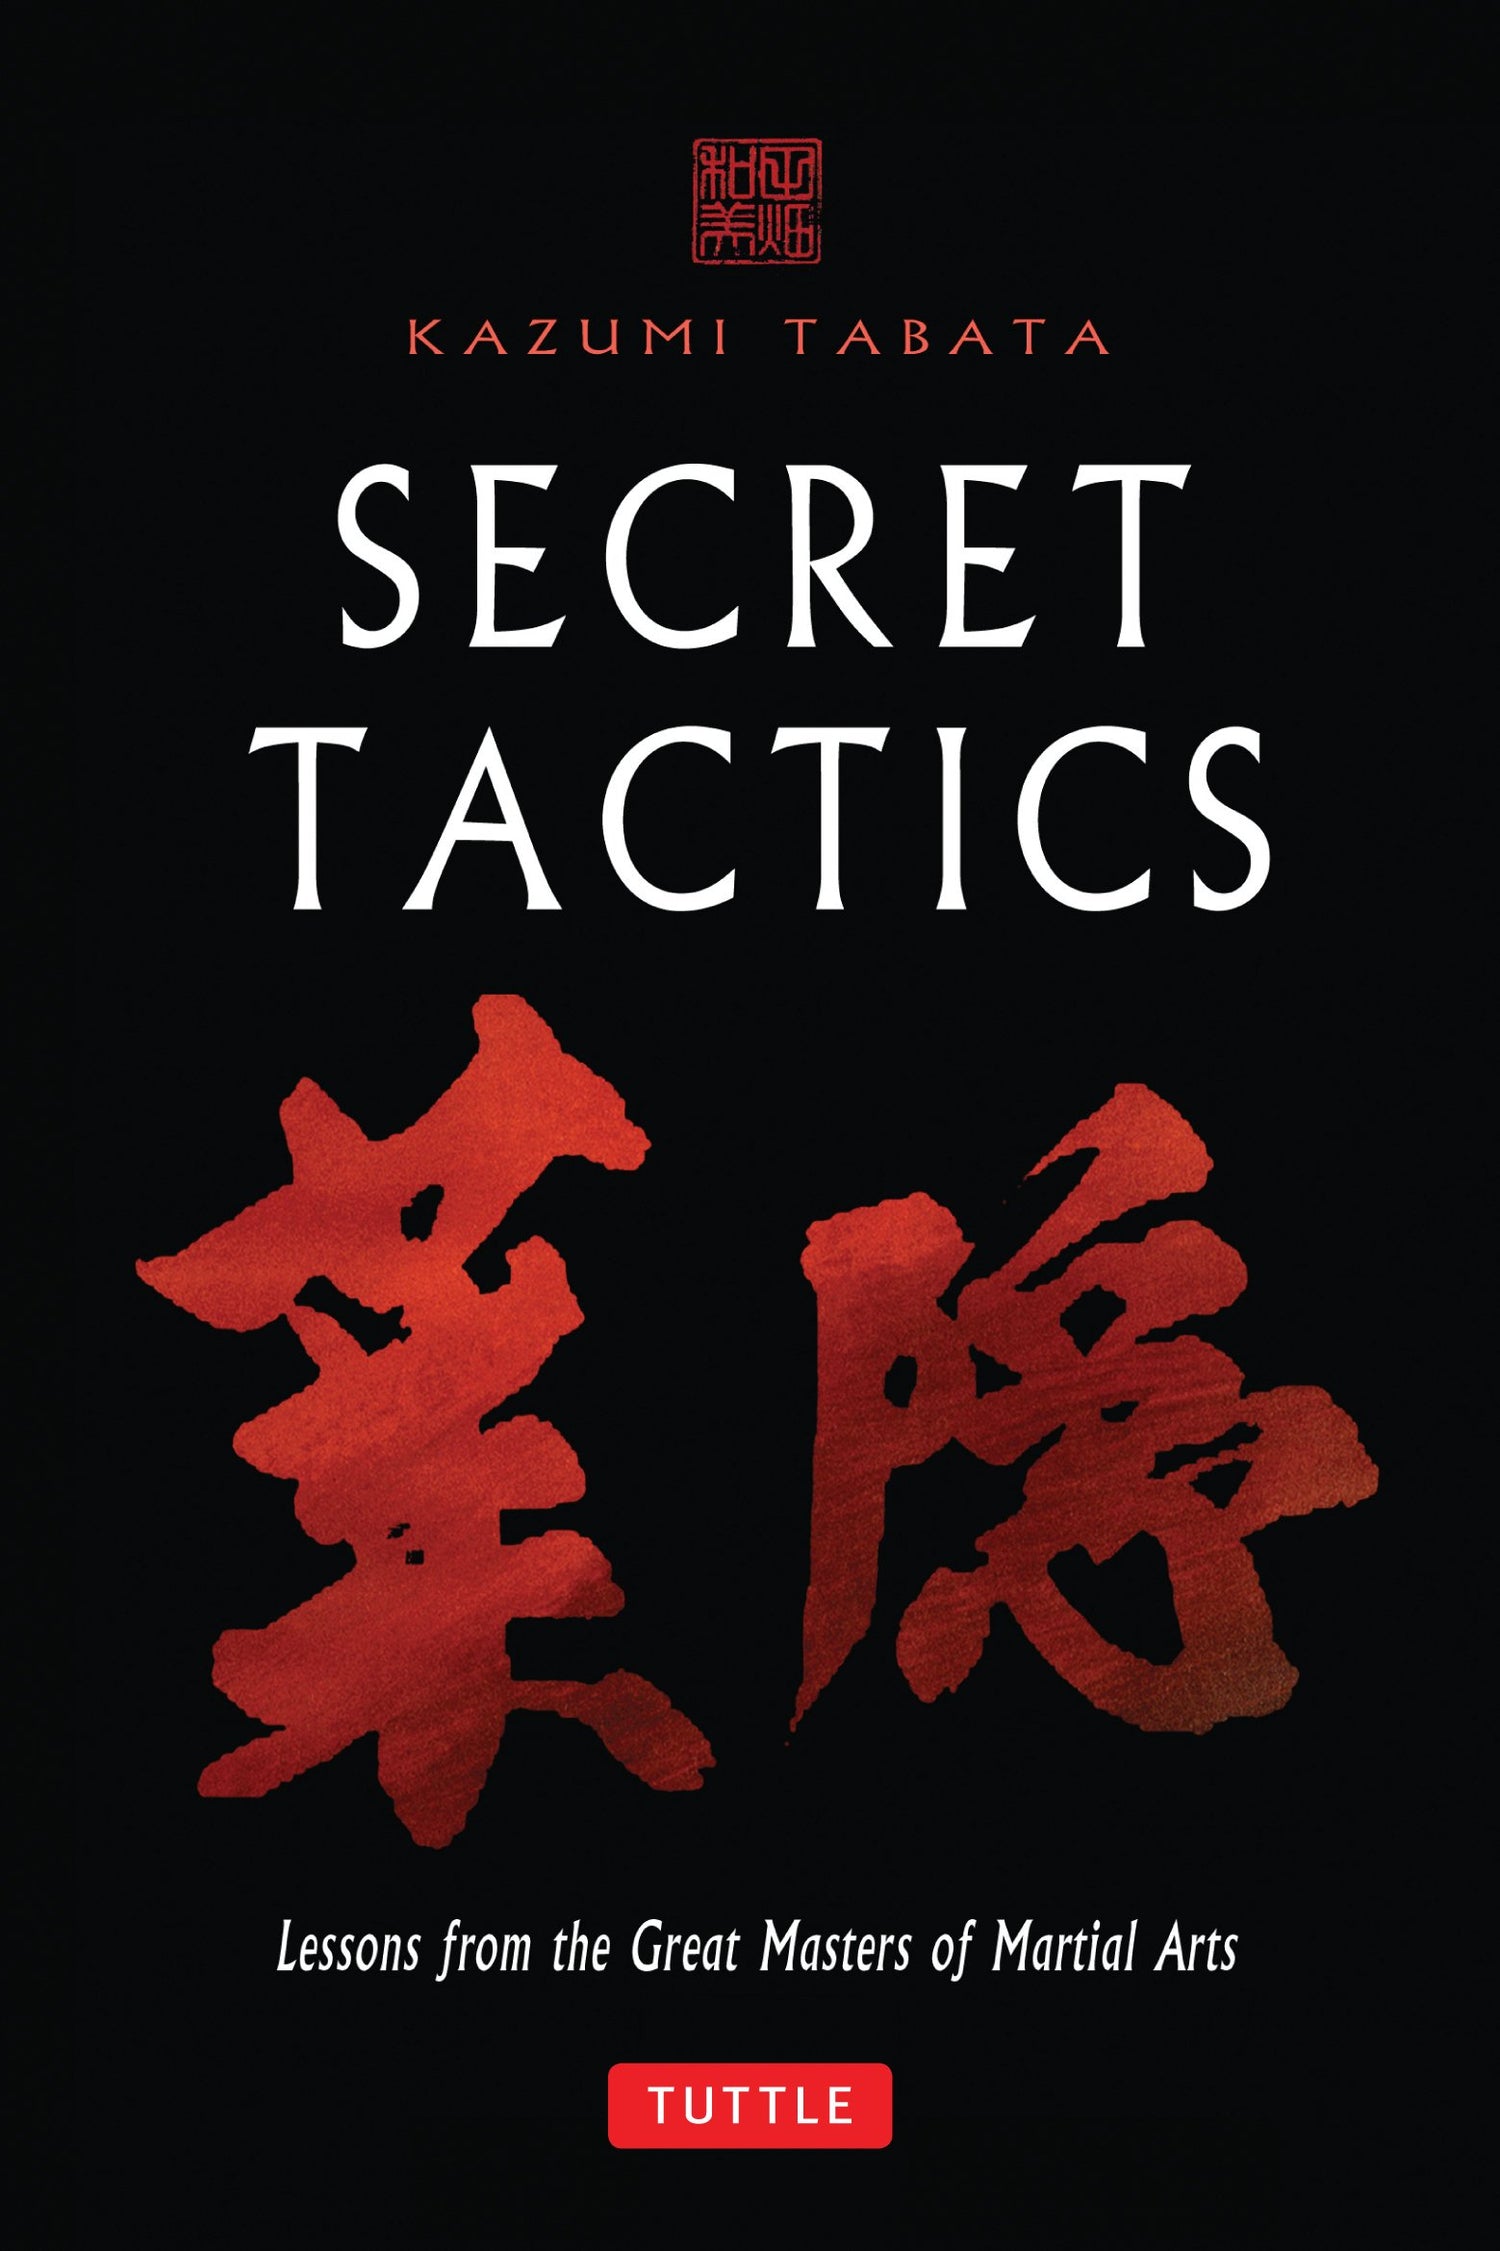 Secret Tactics: Lessons from the Great Masters of Martial Arts 田端和美著 (ハードカバー) (中古)